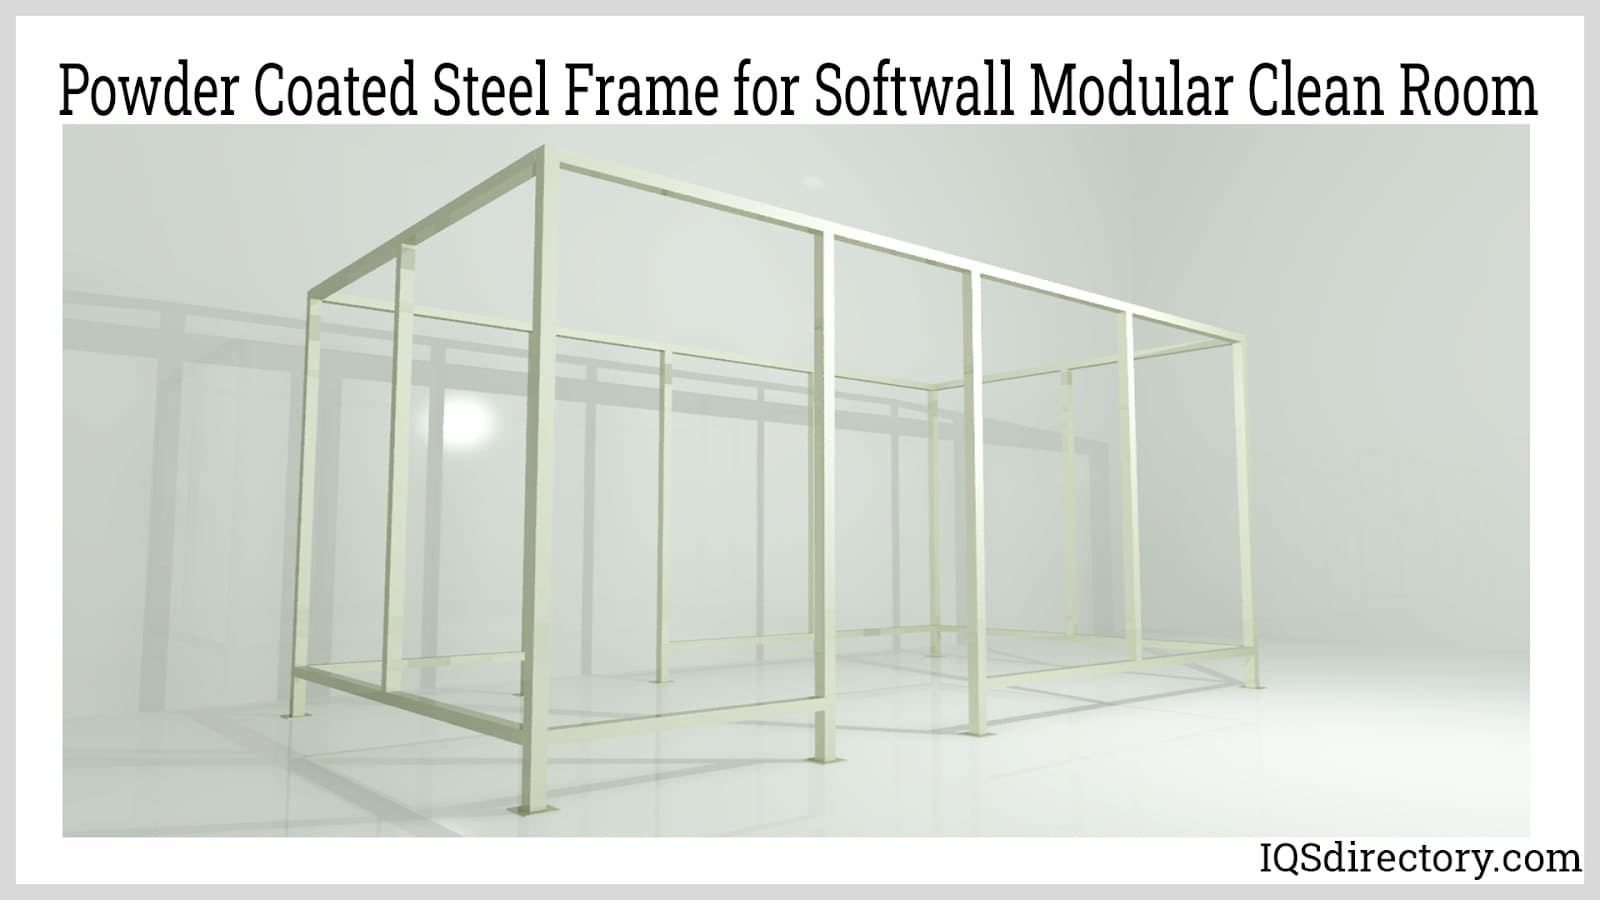 Powder Coated Steel Frame for Softwall Modular Clean Room